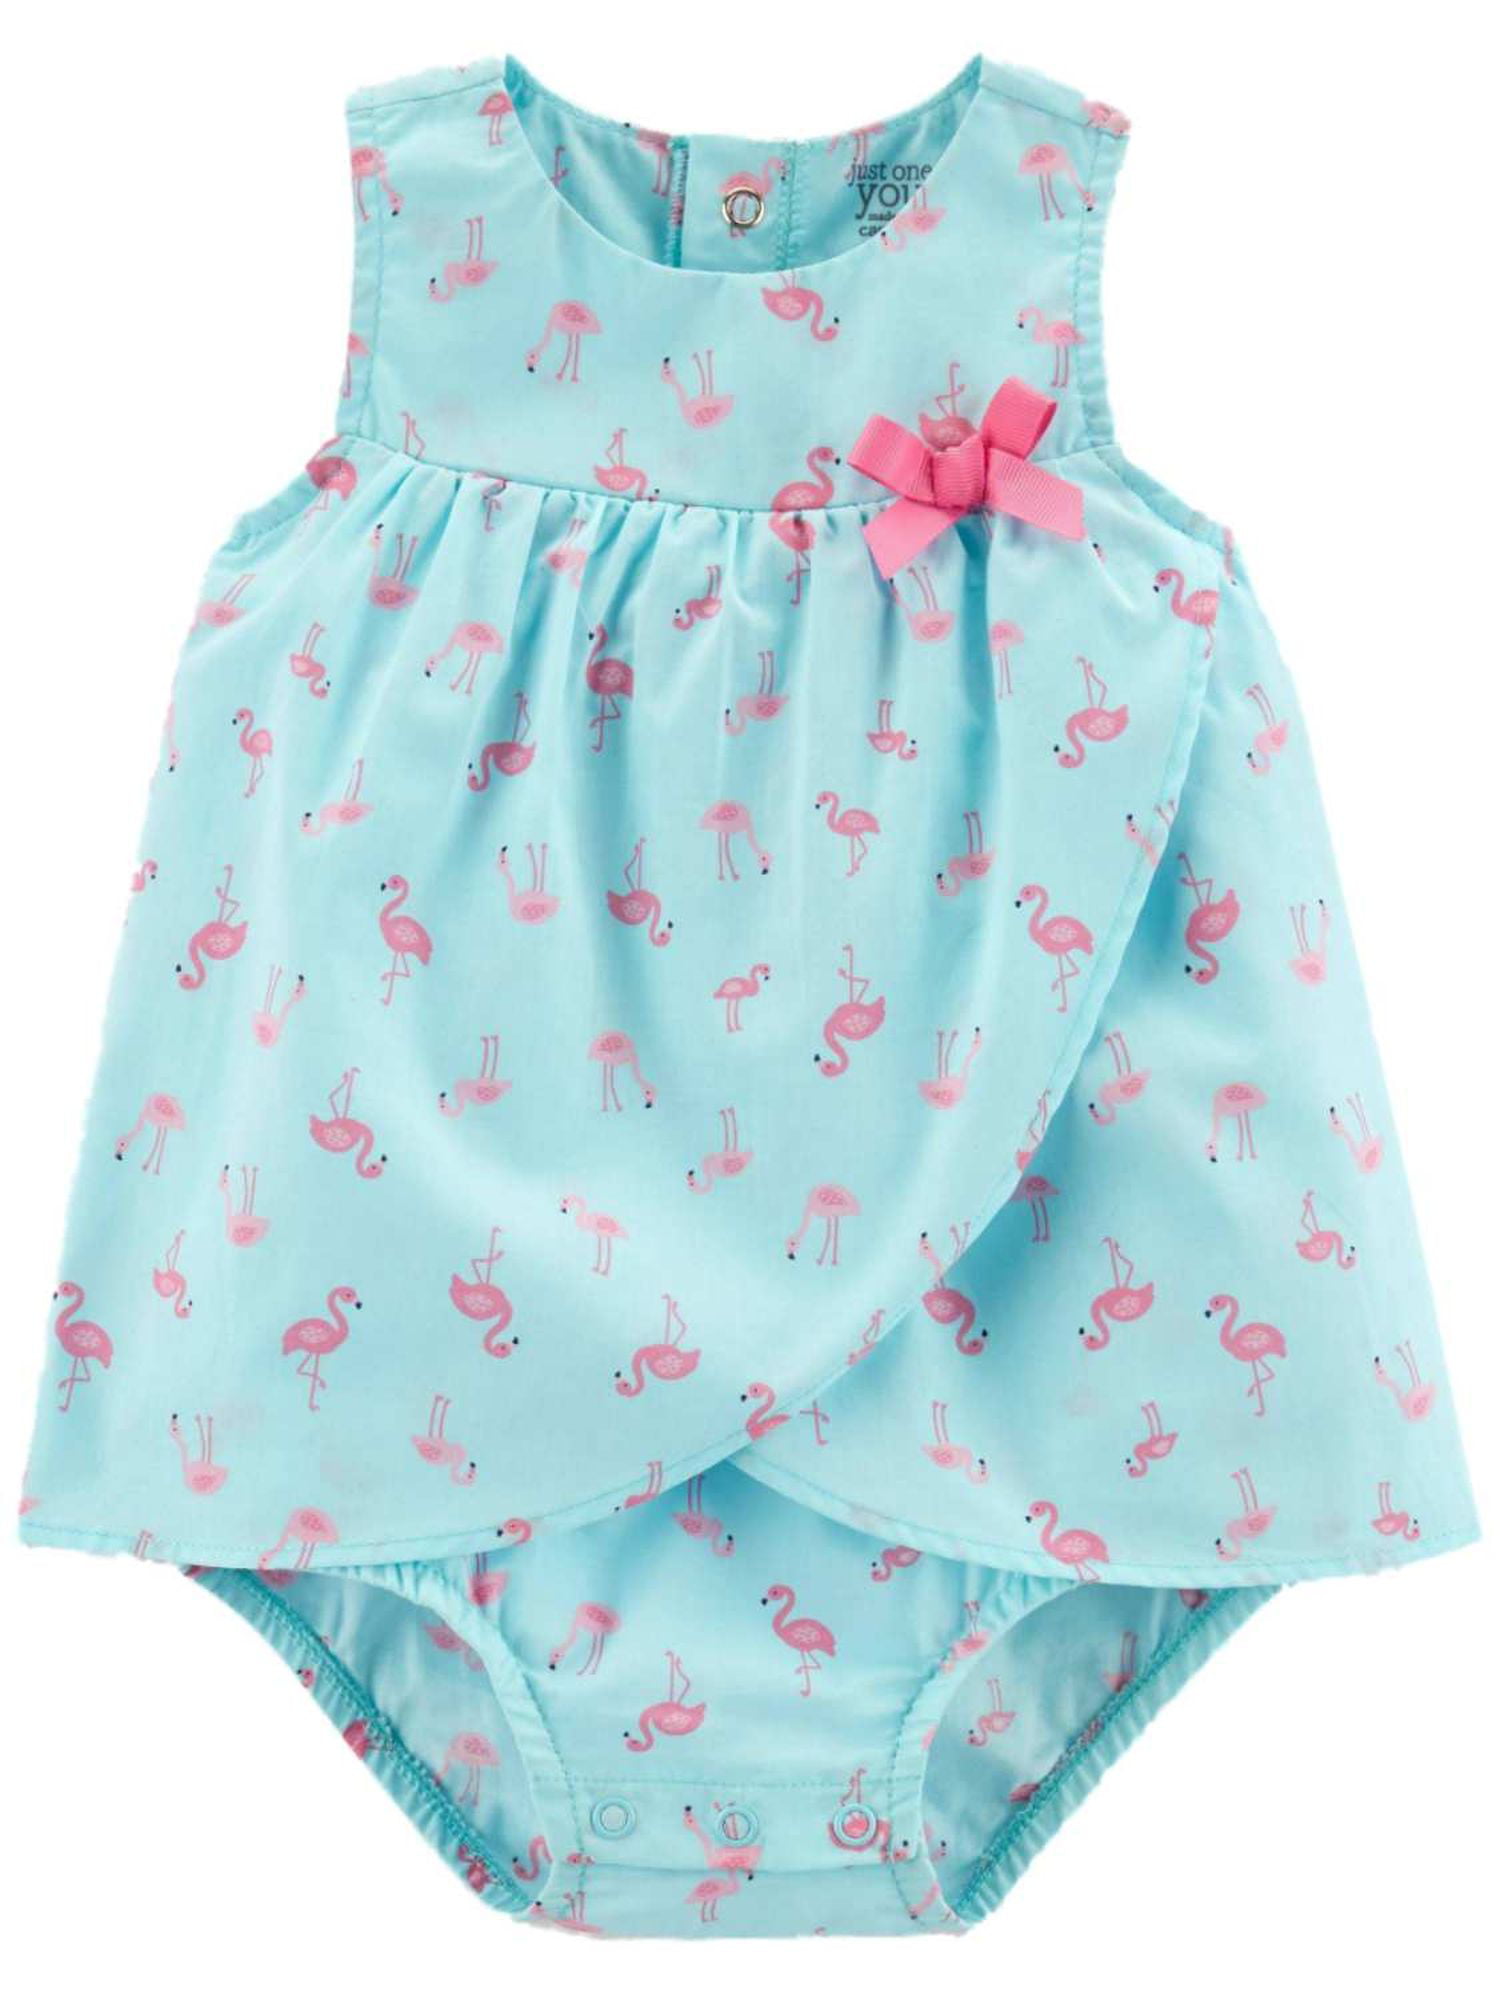 SUNSUIT BABY GIRLS OUTFIT FLORAL NEW WITH TAGS CARTER'S ONE PIECE CREEPER